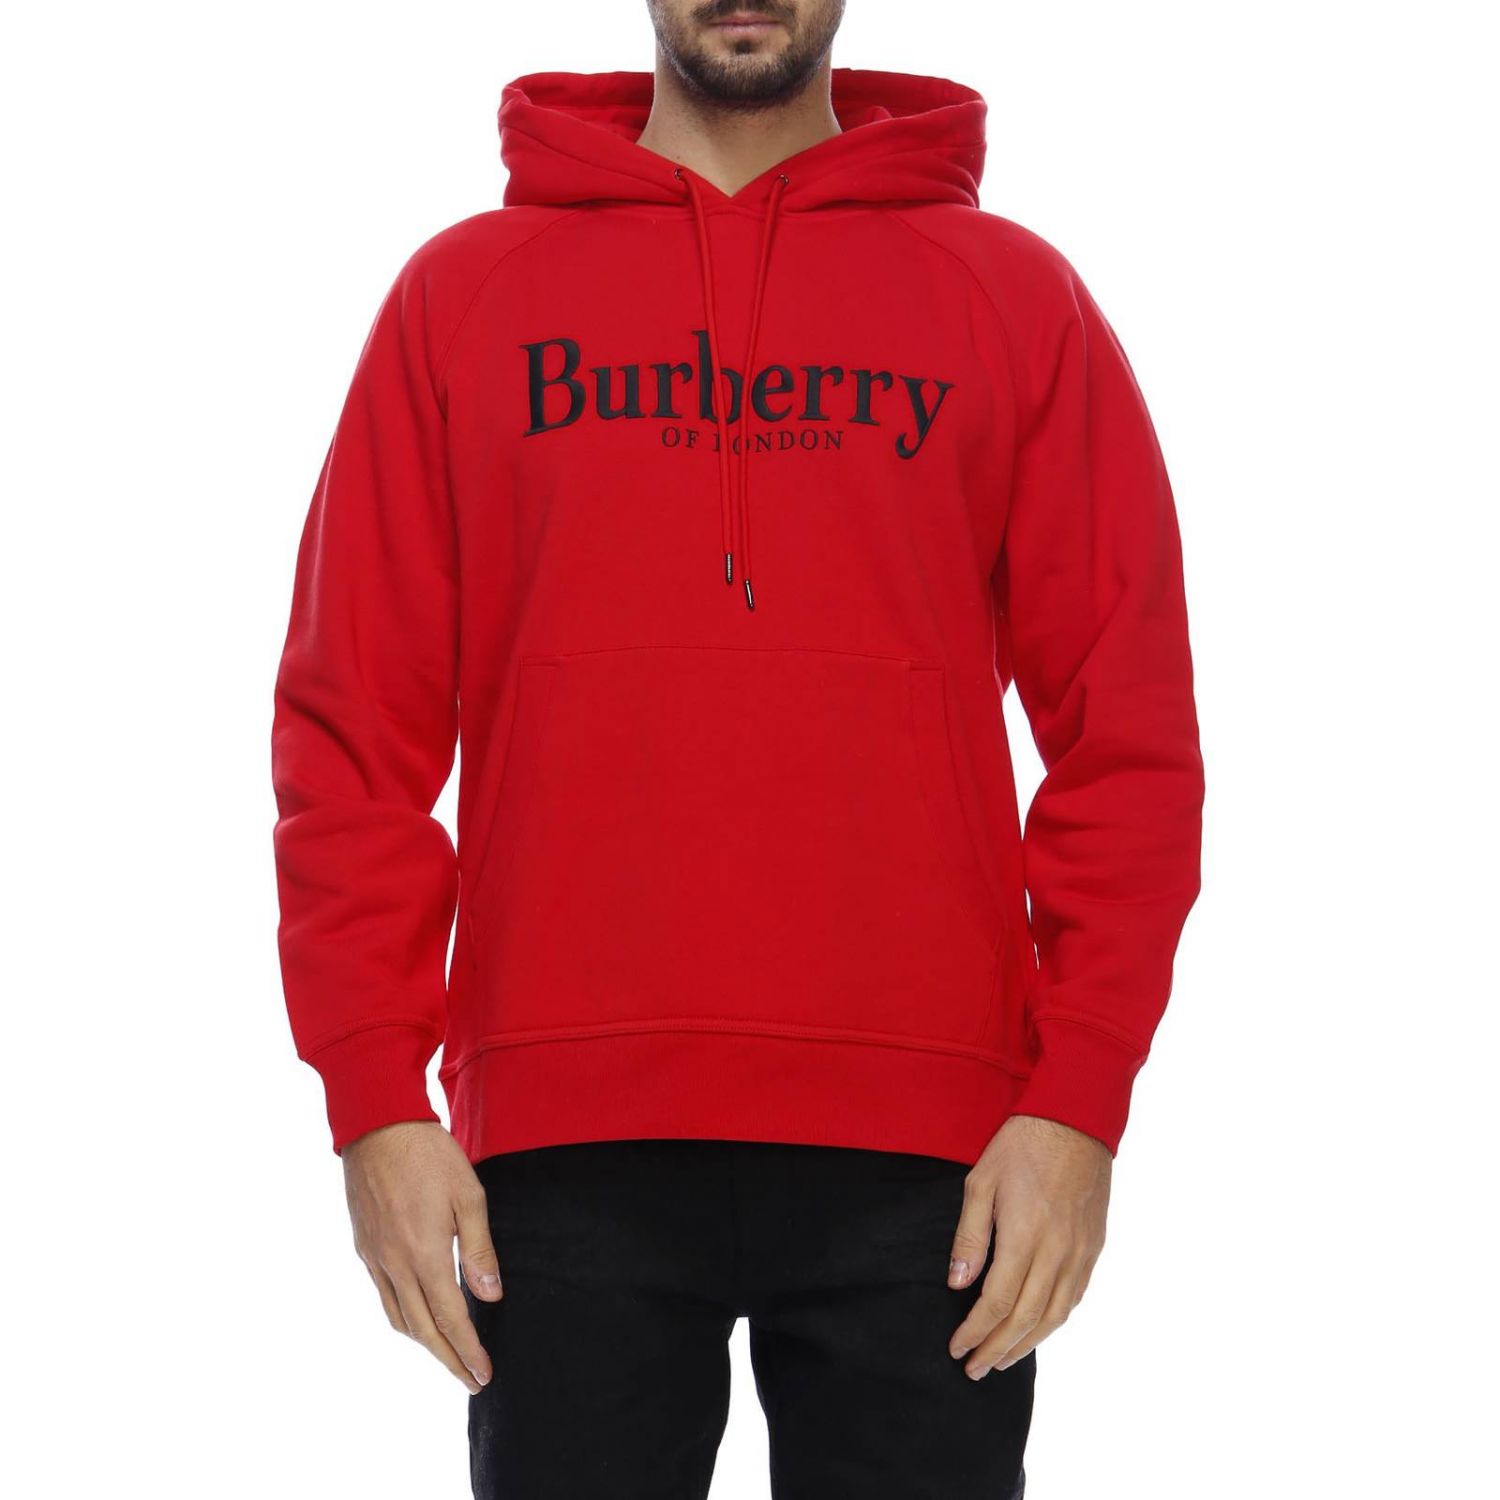 burberry sweater red